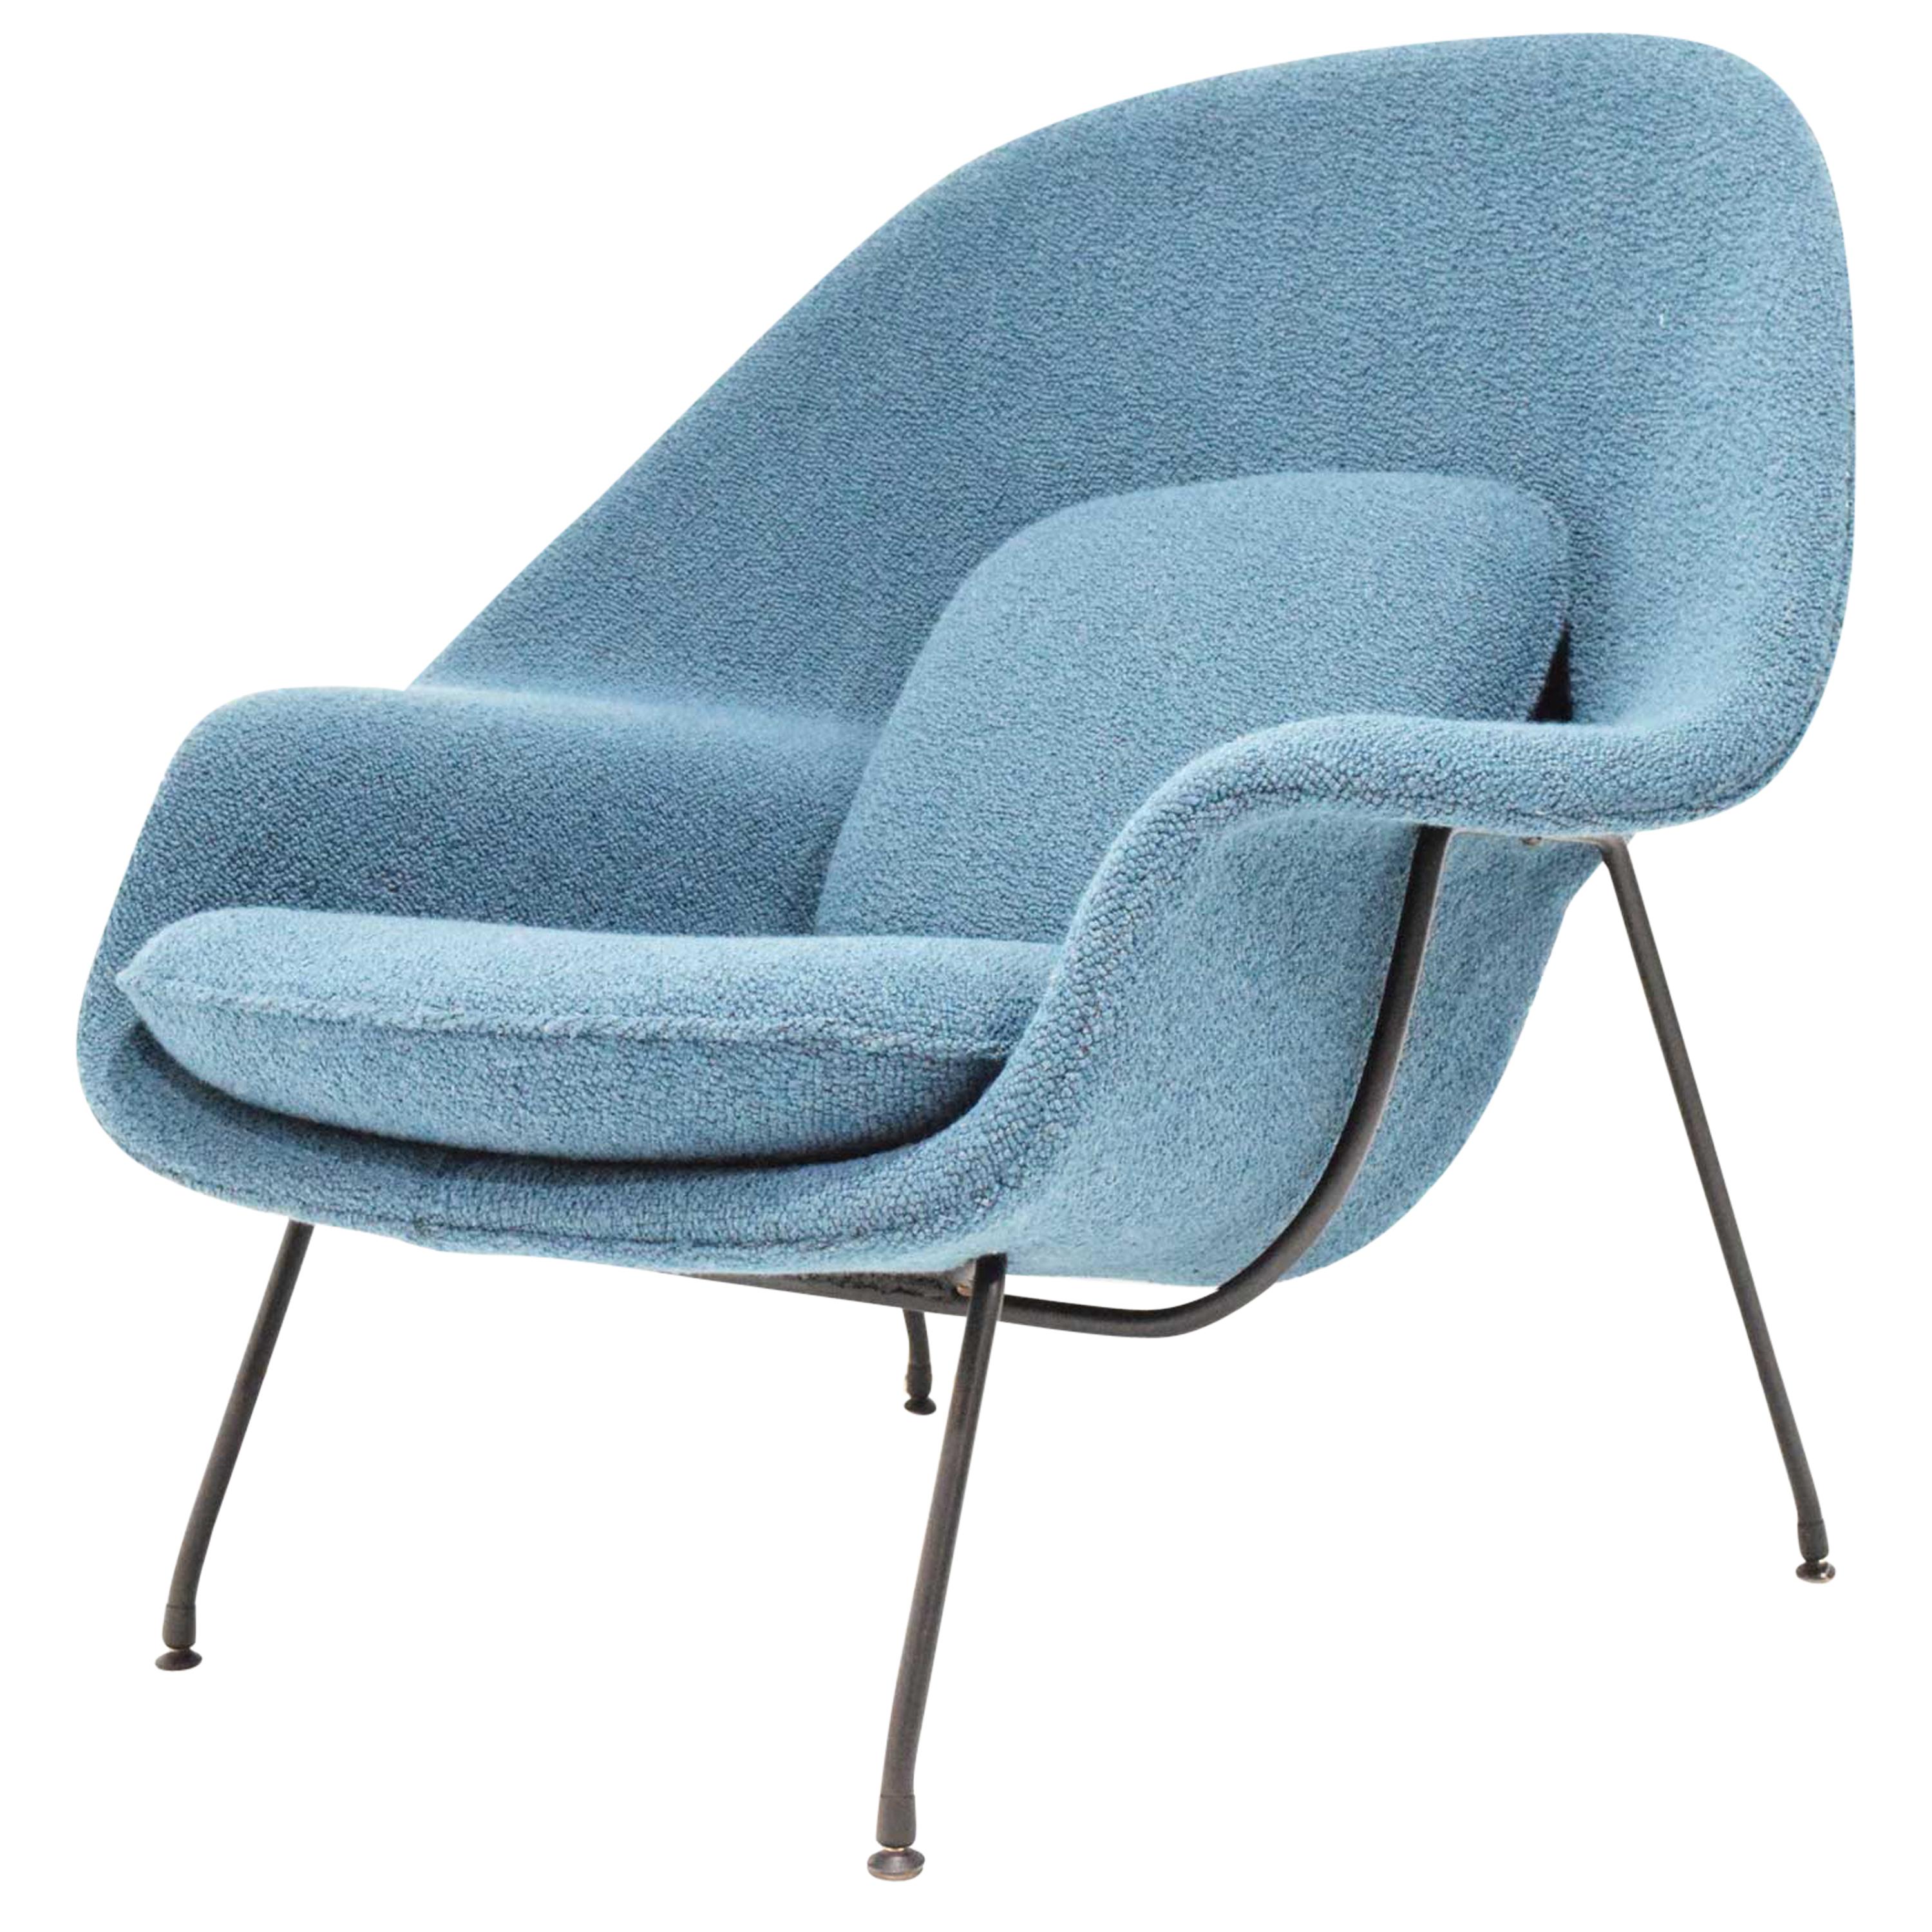 We have restored this 1961 Knoll Womb chair and added new upholstery by Larsen. Fabric is beautiful blue with a nubby pile.